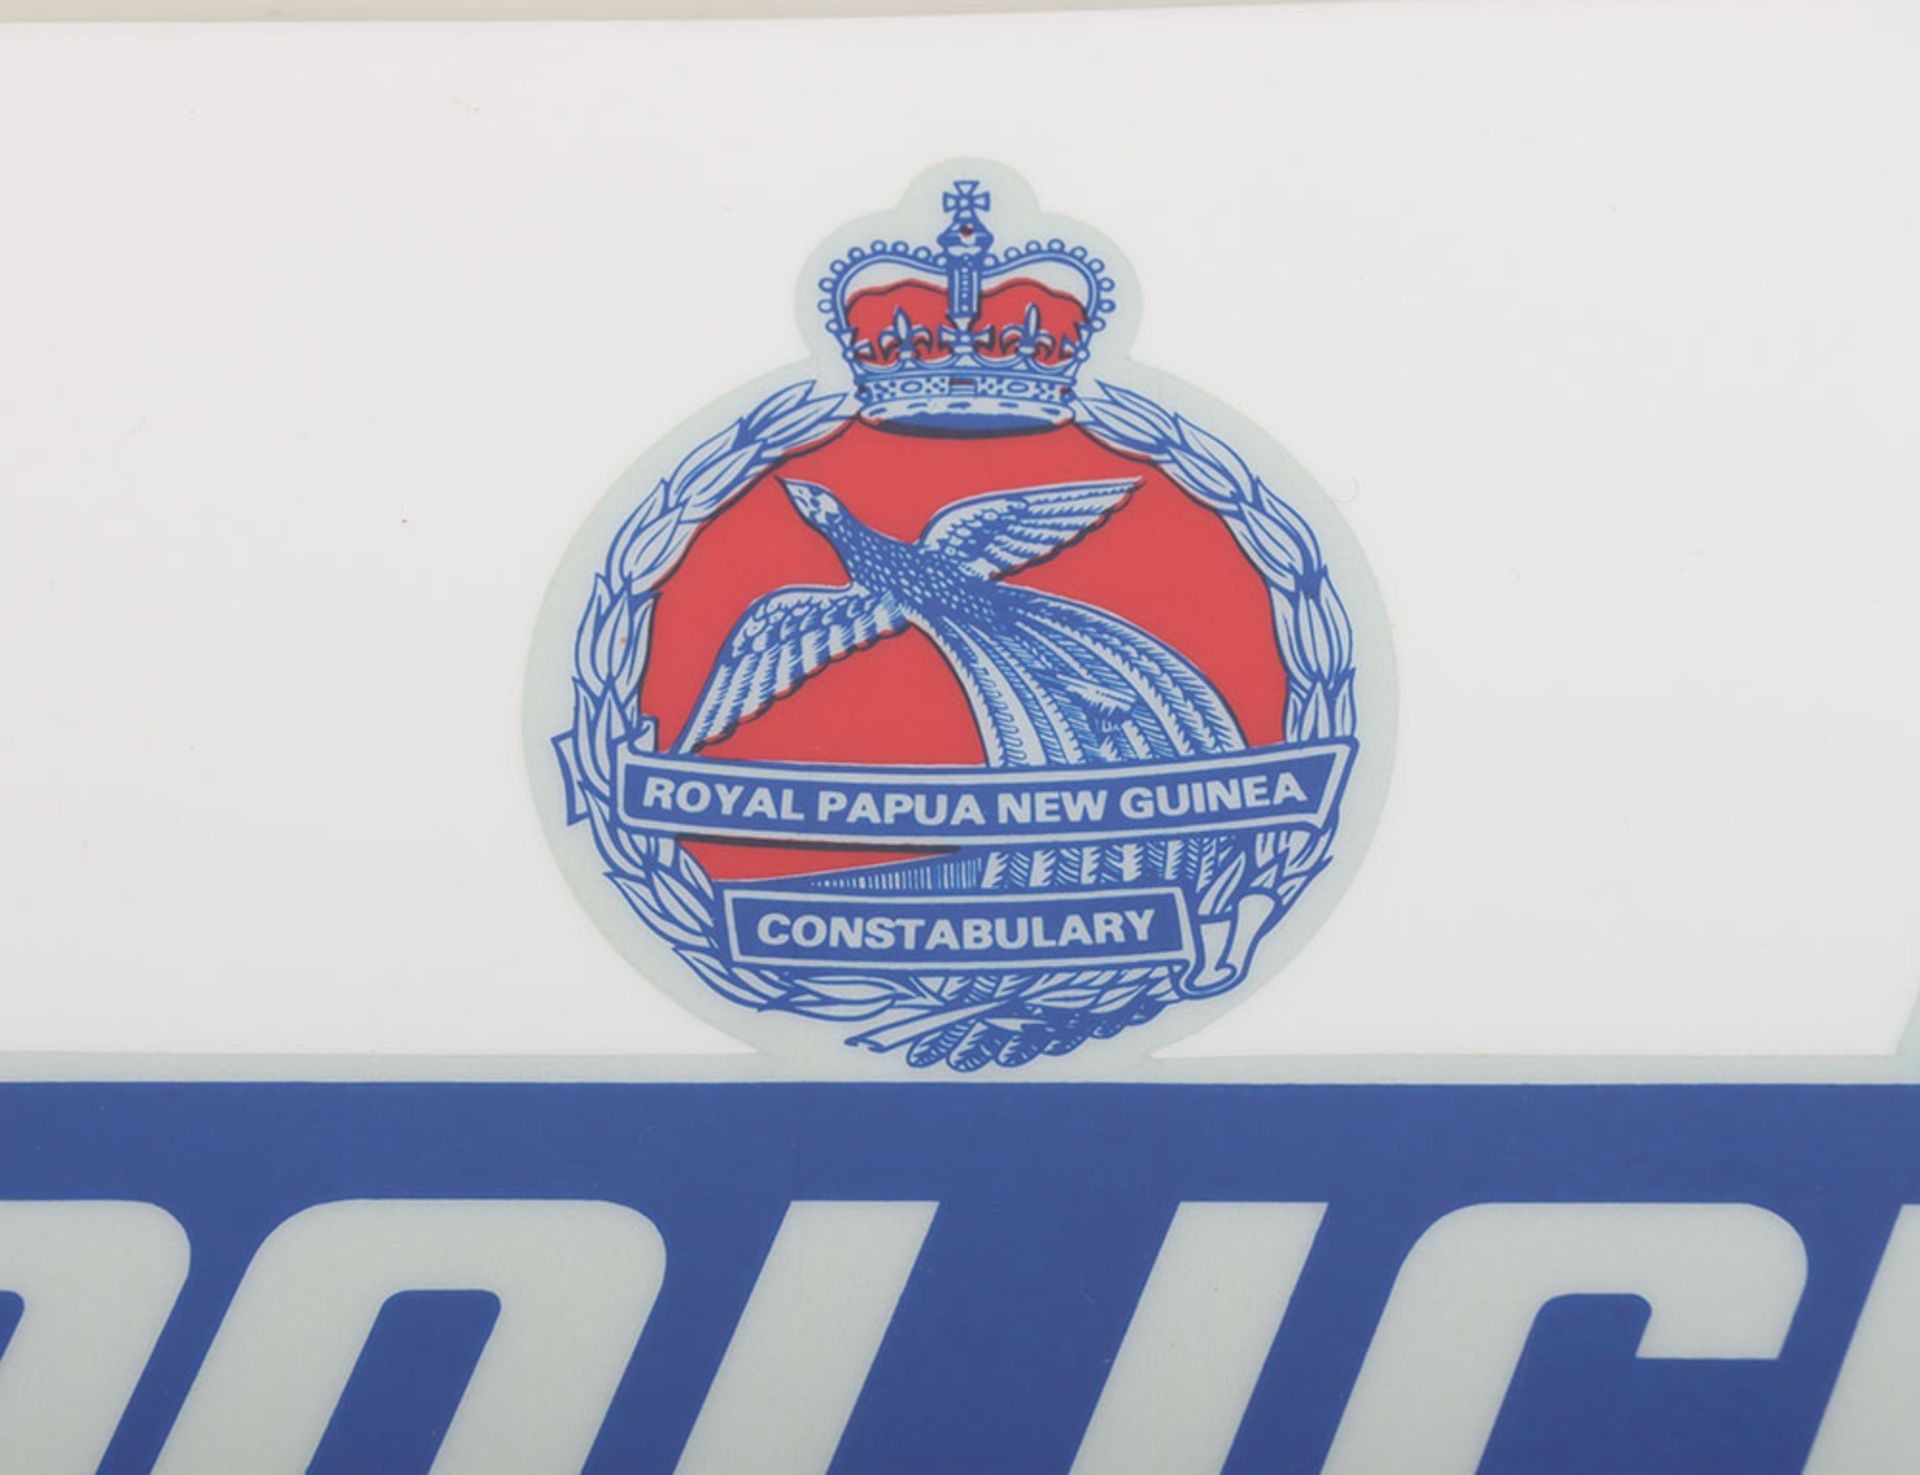 Royal Papua & New Guinea Constabulary vehicle Decals - Image 2 of 3